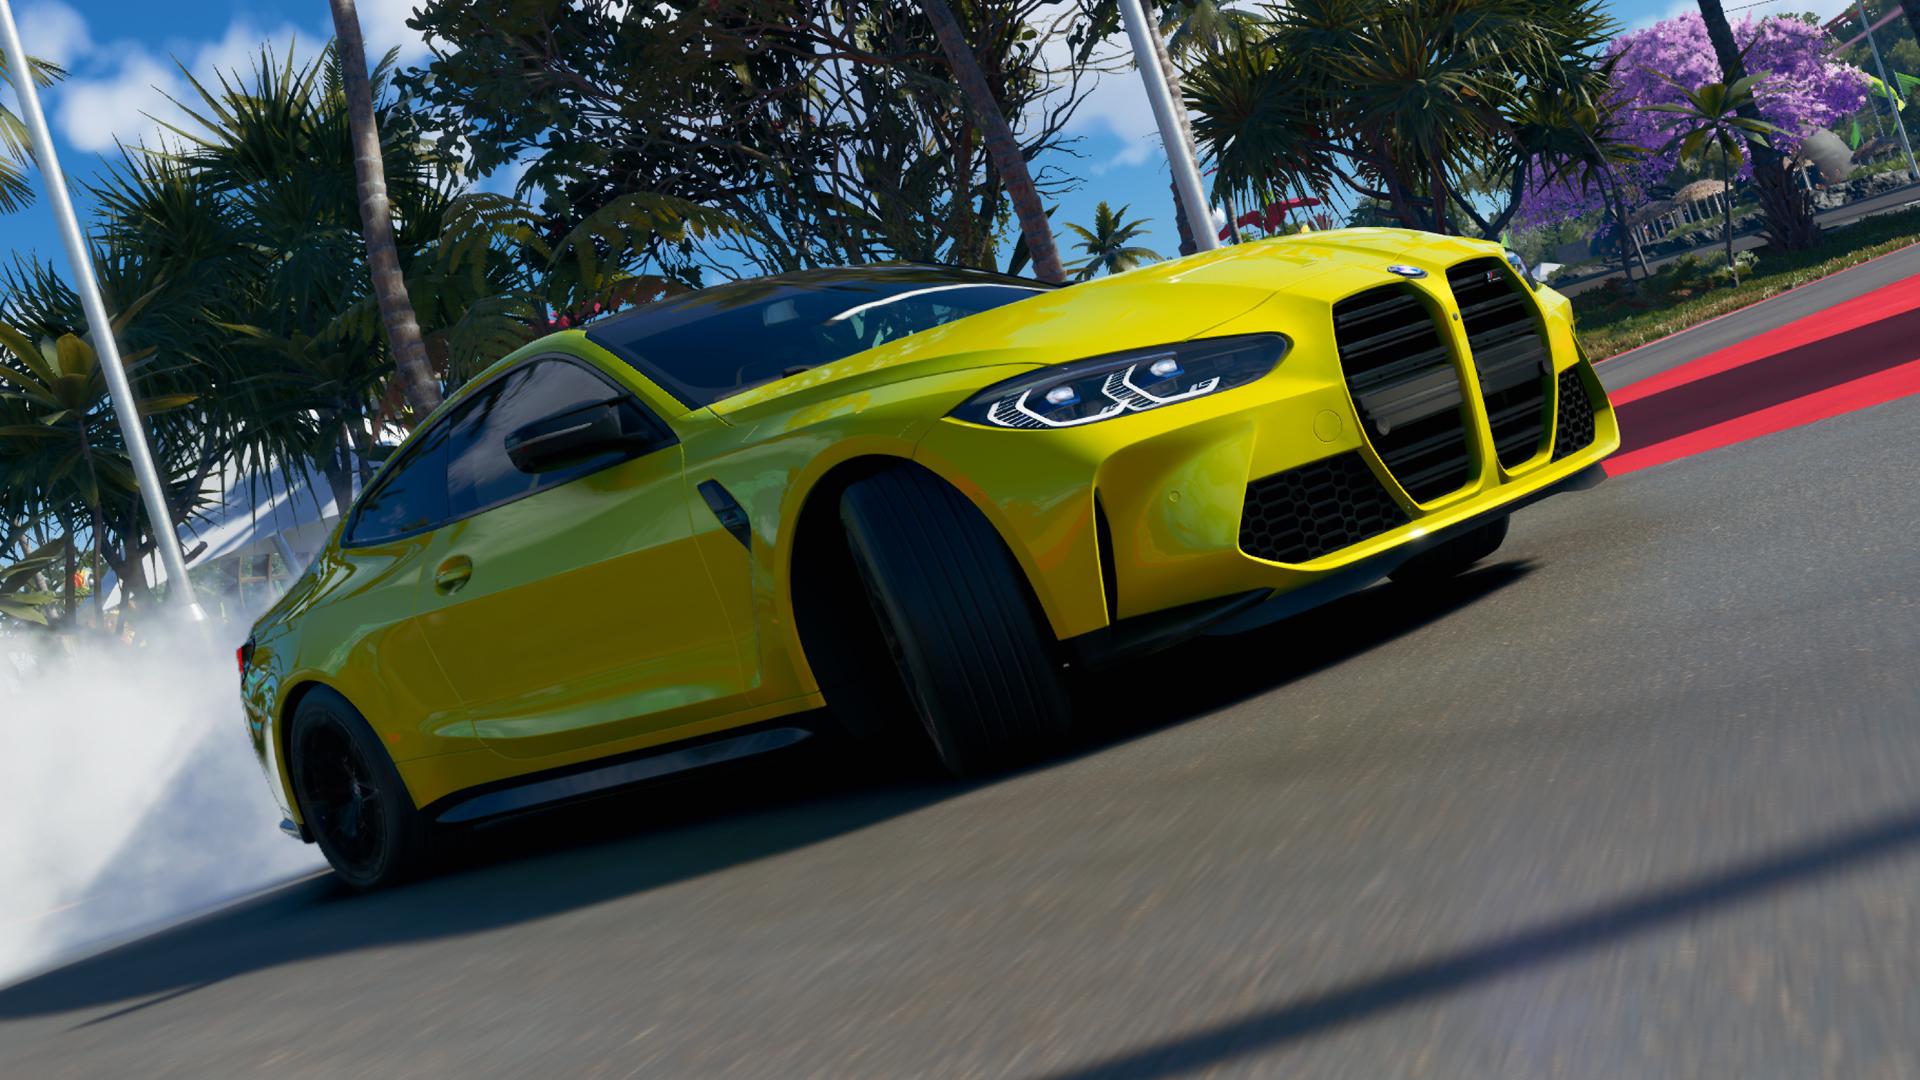 The Crew Motorfest: Tips and tricks for the game